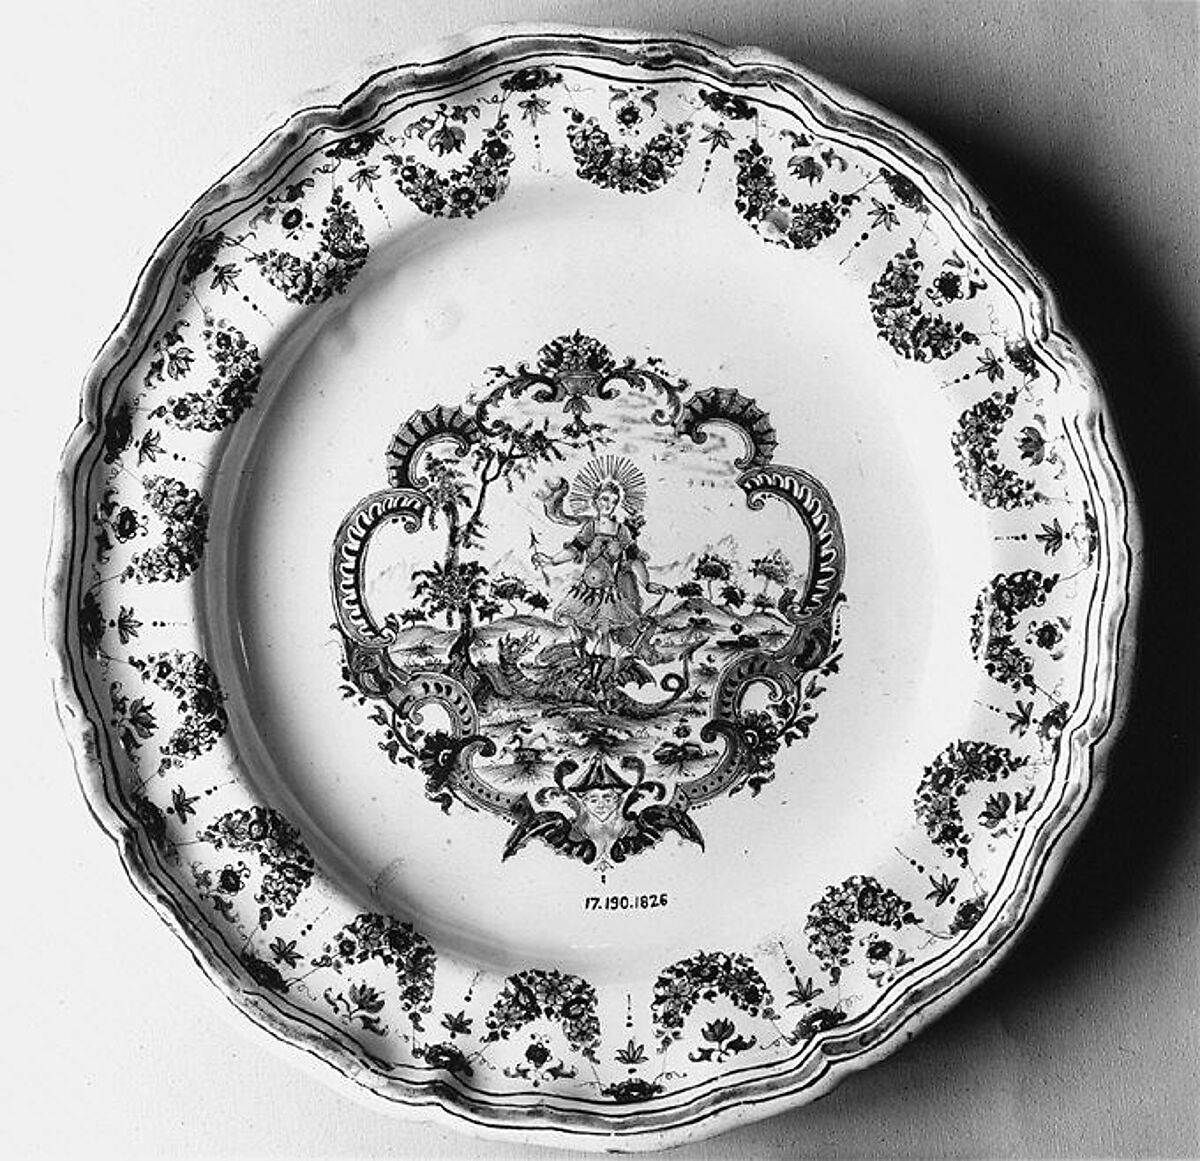 Plate, Olérys Factory (French, established Moustiers, 1738), Faience (tin-glazed earthenware), French, Moustiers 